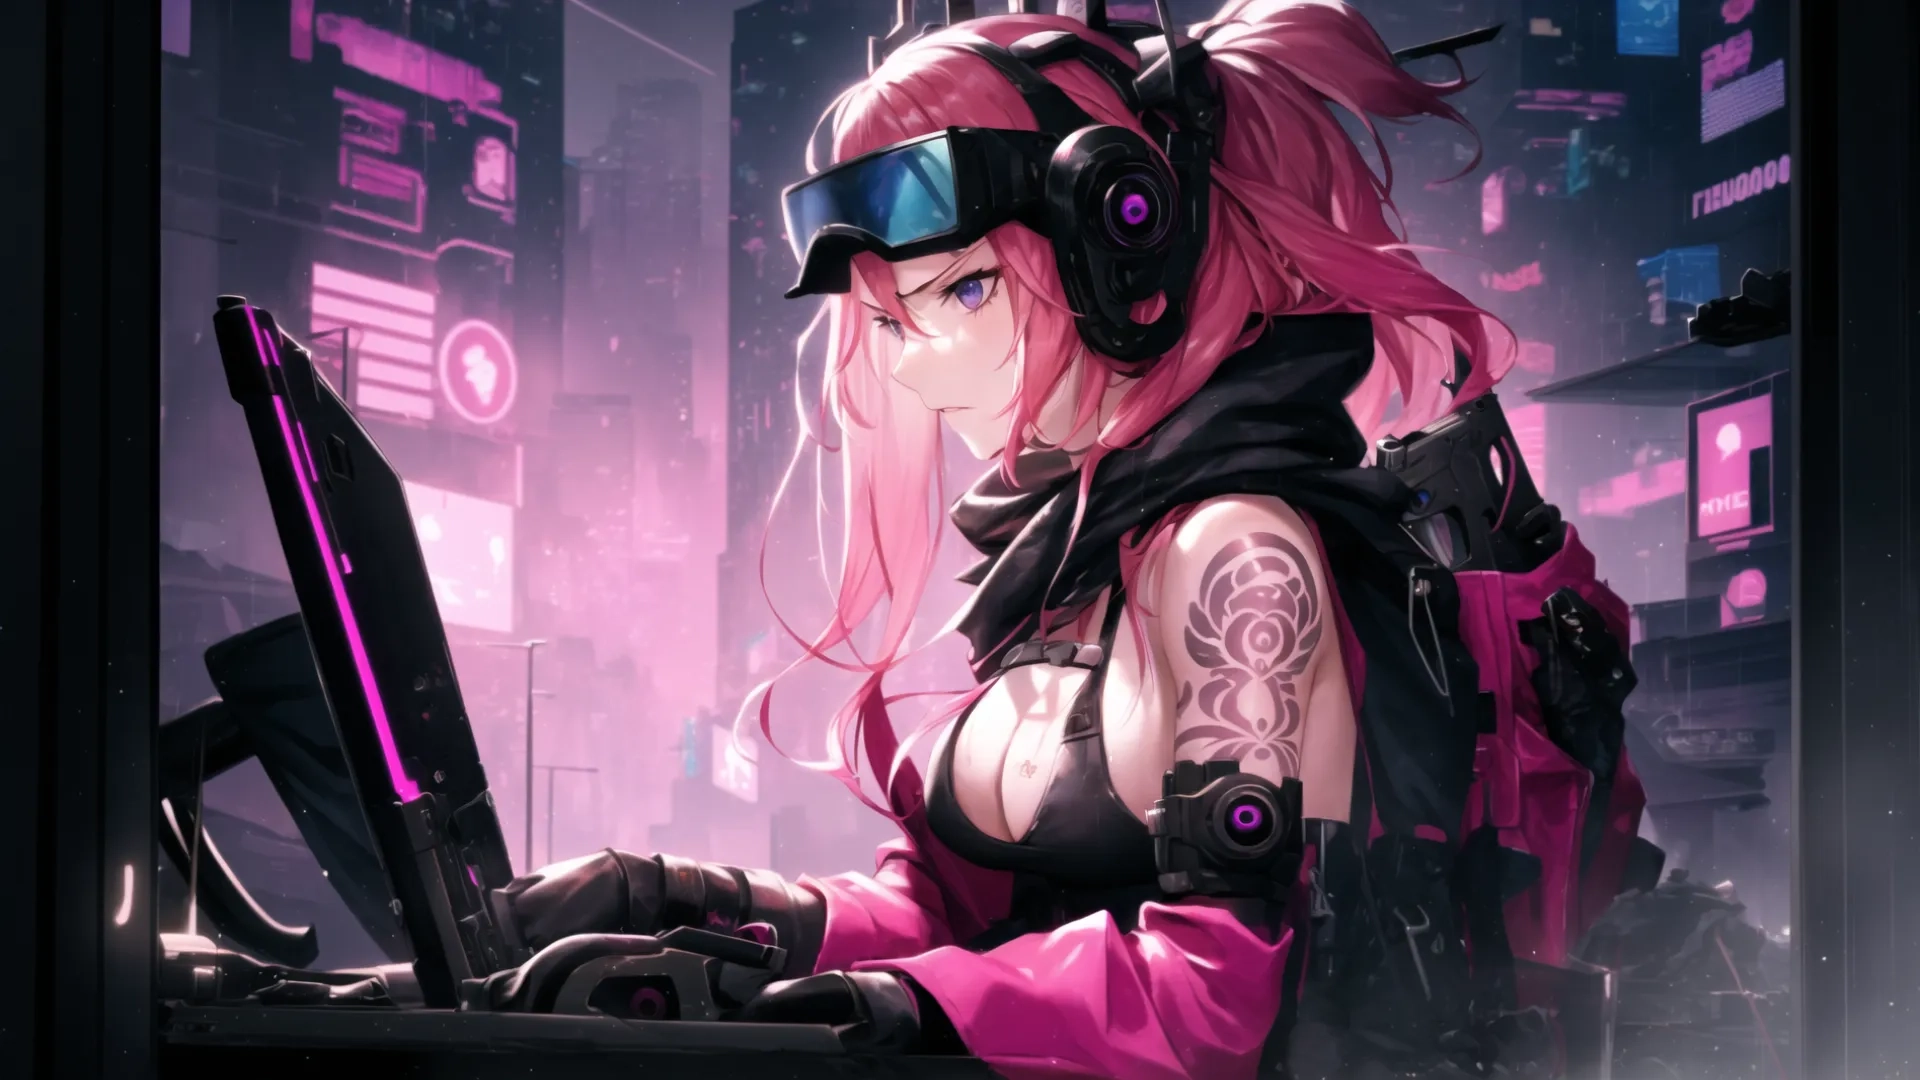 anime style artwork with female user looking out over street in cyber - age city with neon lights and cyber weapons behind her computer screen, headphones
